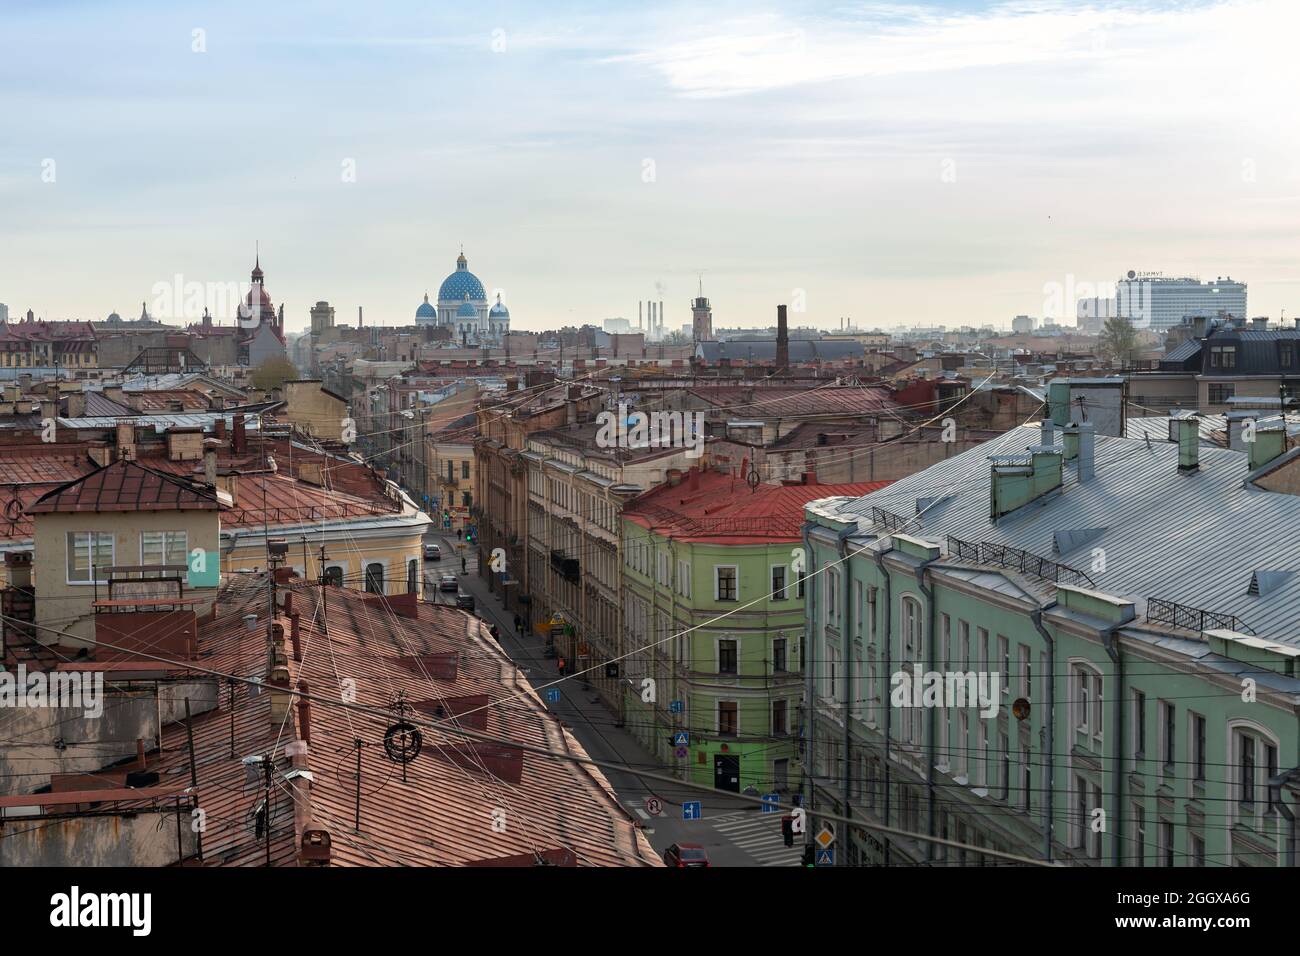 St. Petersburg, Russia - October 25, 2014: Voznesensky Avenue, aerial street view taken from an old house roof Stock Photo